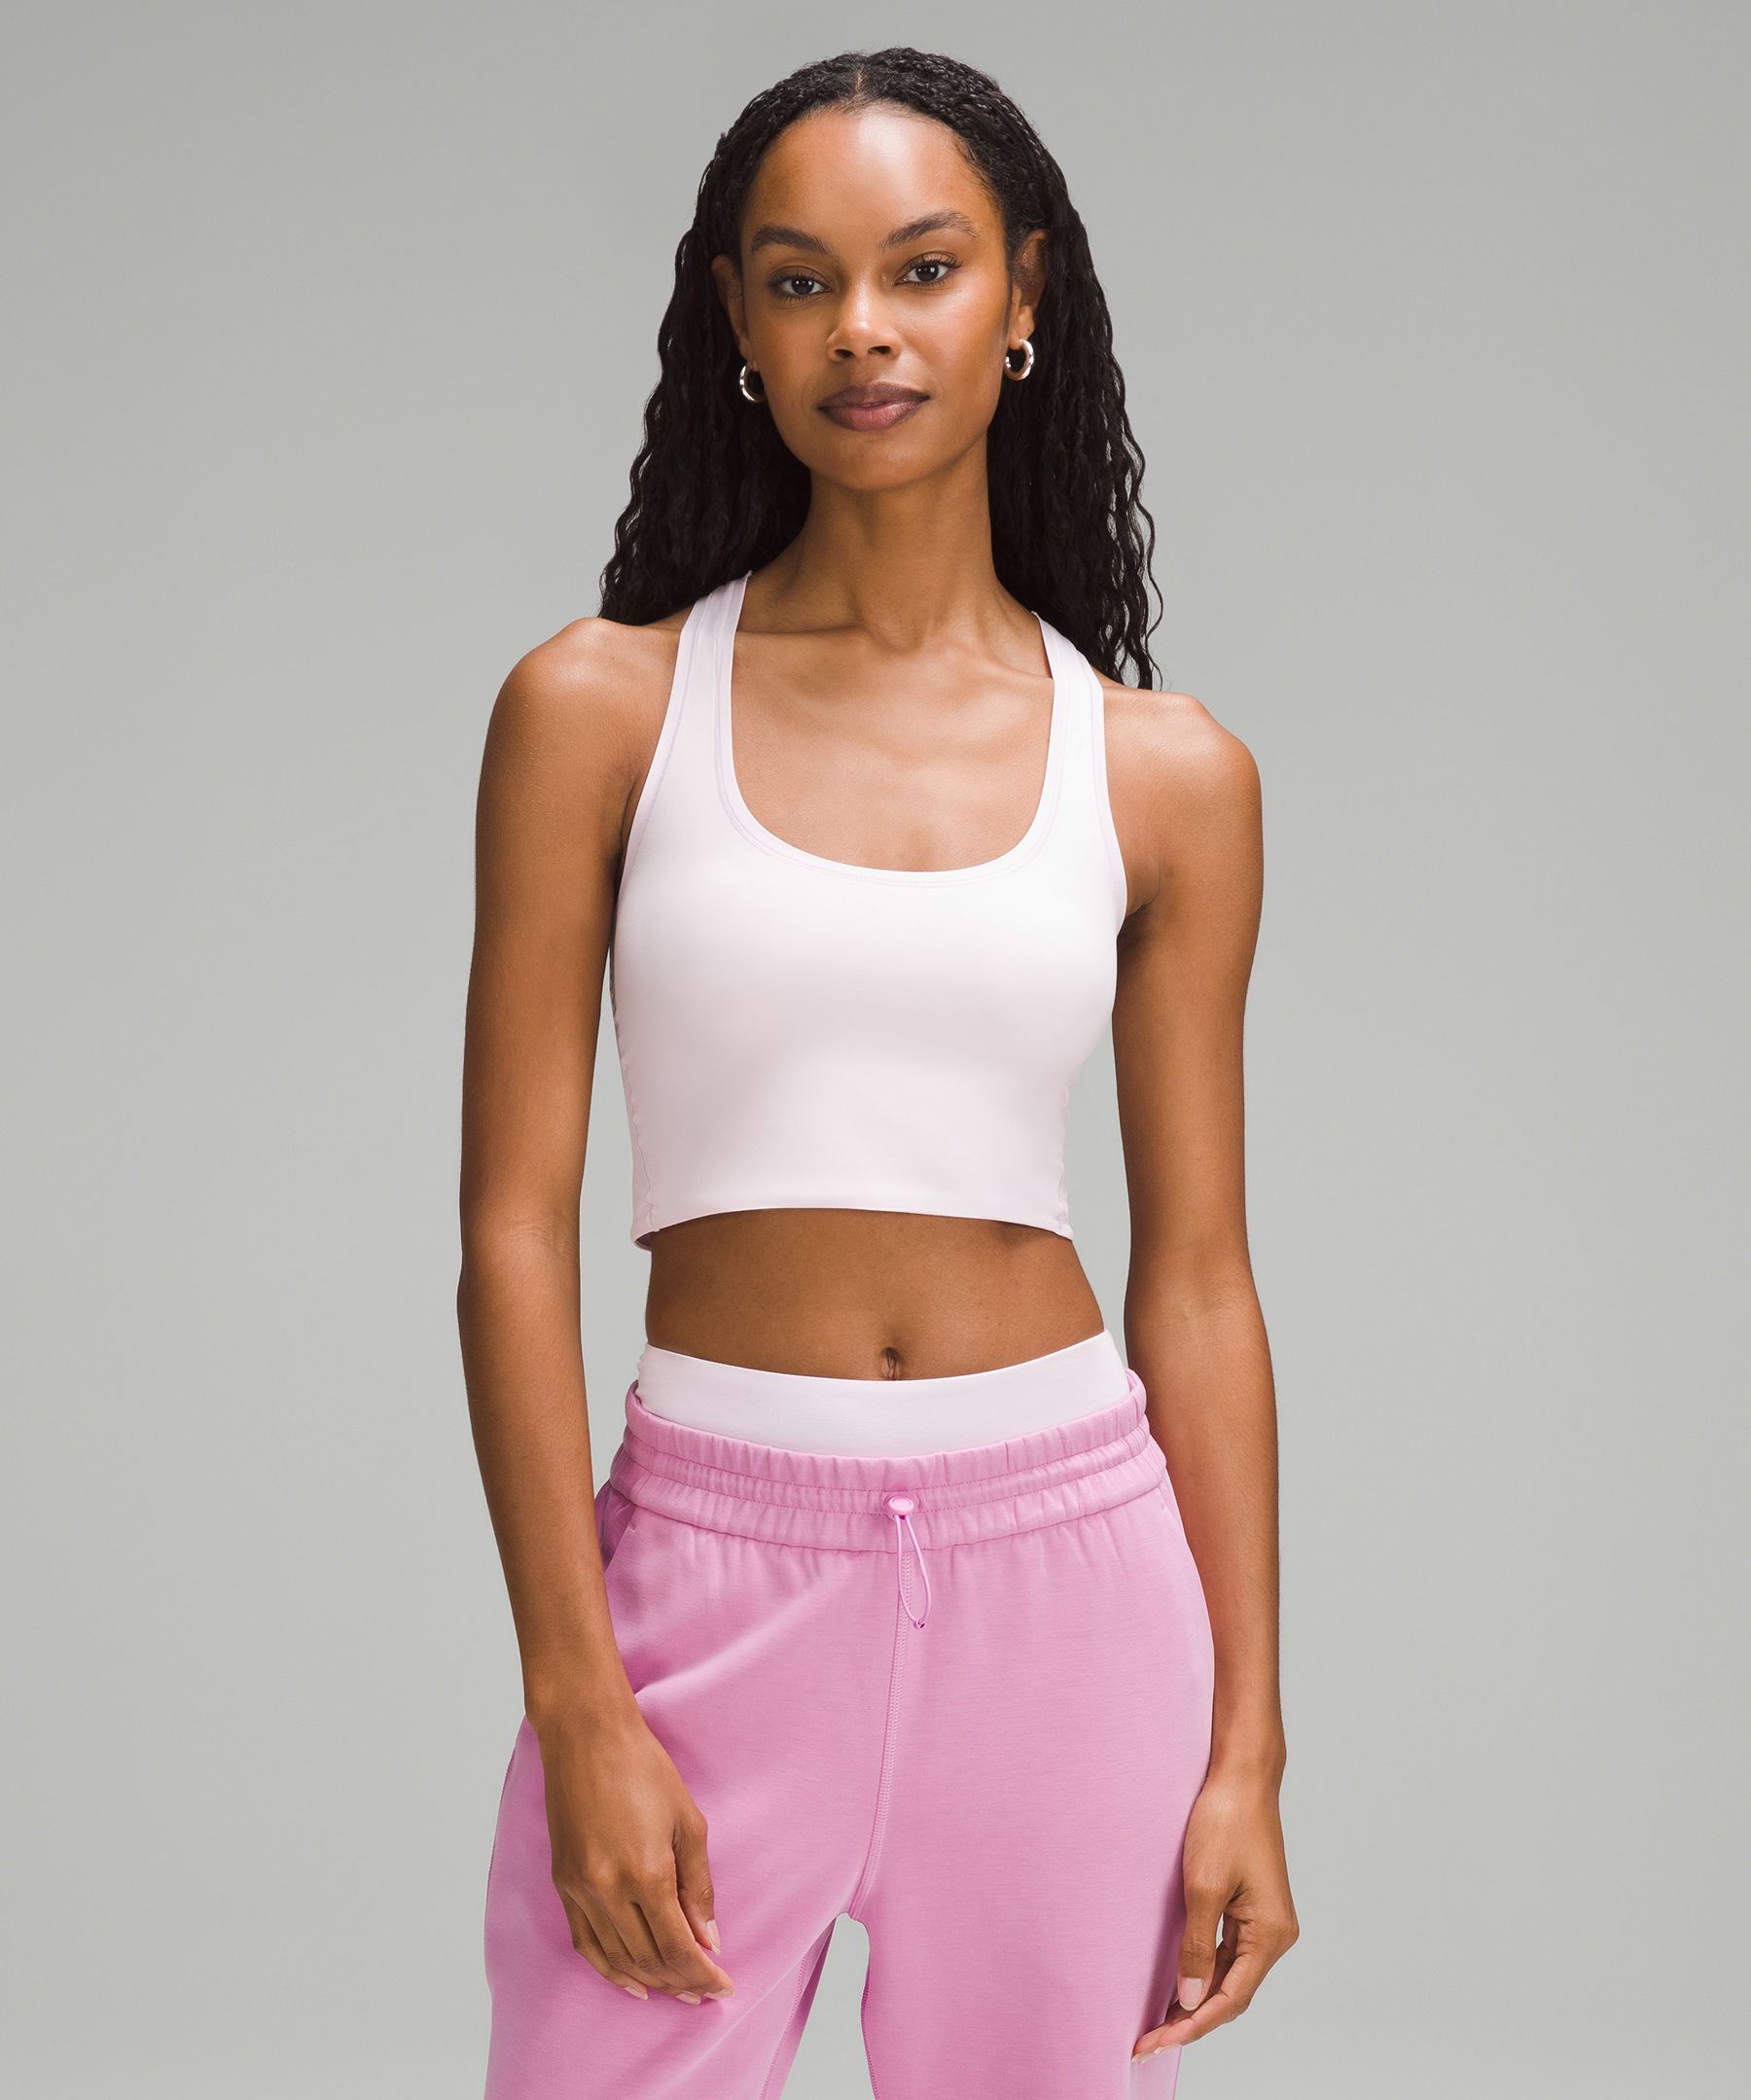 new lululemon: Wundermost made with Ultra-Soft Nulu - Living My